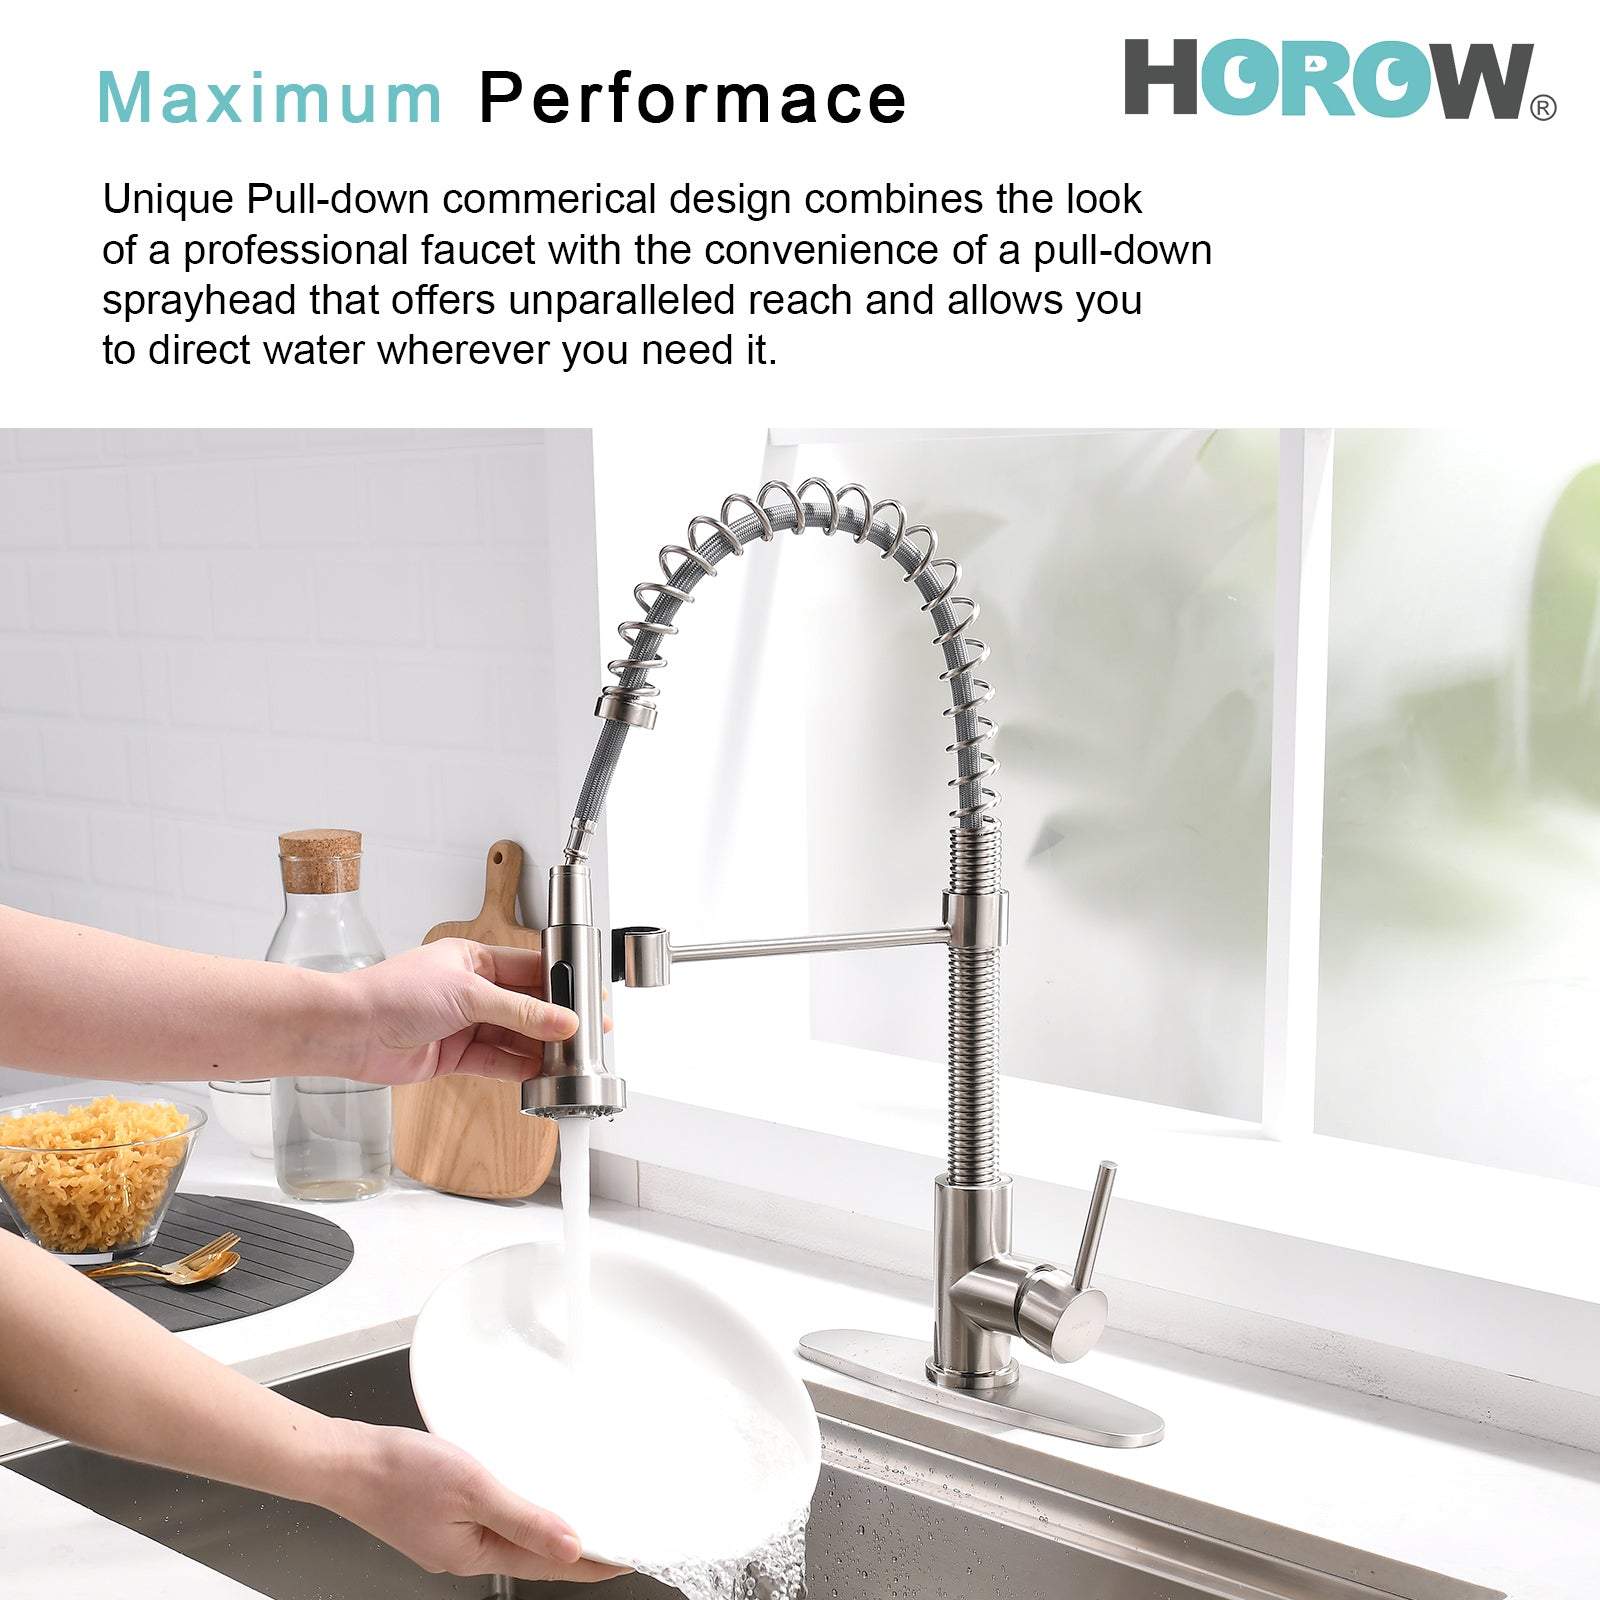 HOROW Best Kitchen Faucet With Pull Down Sprayer Model HR-KF0229B